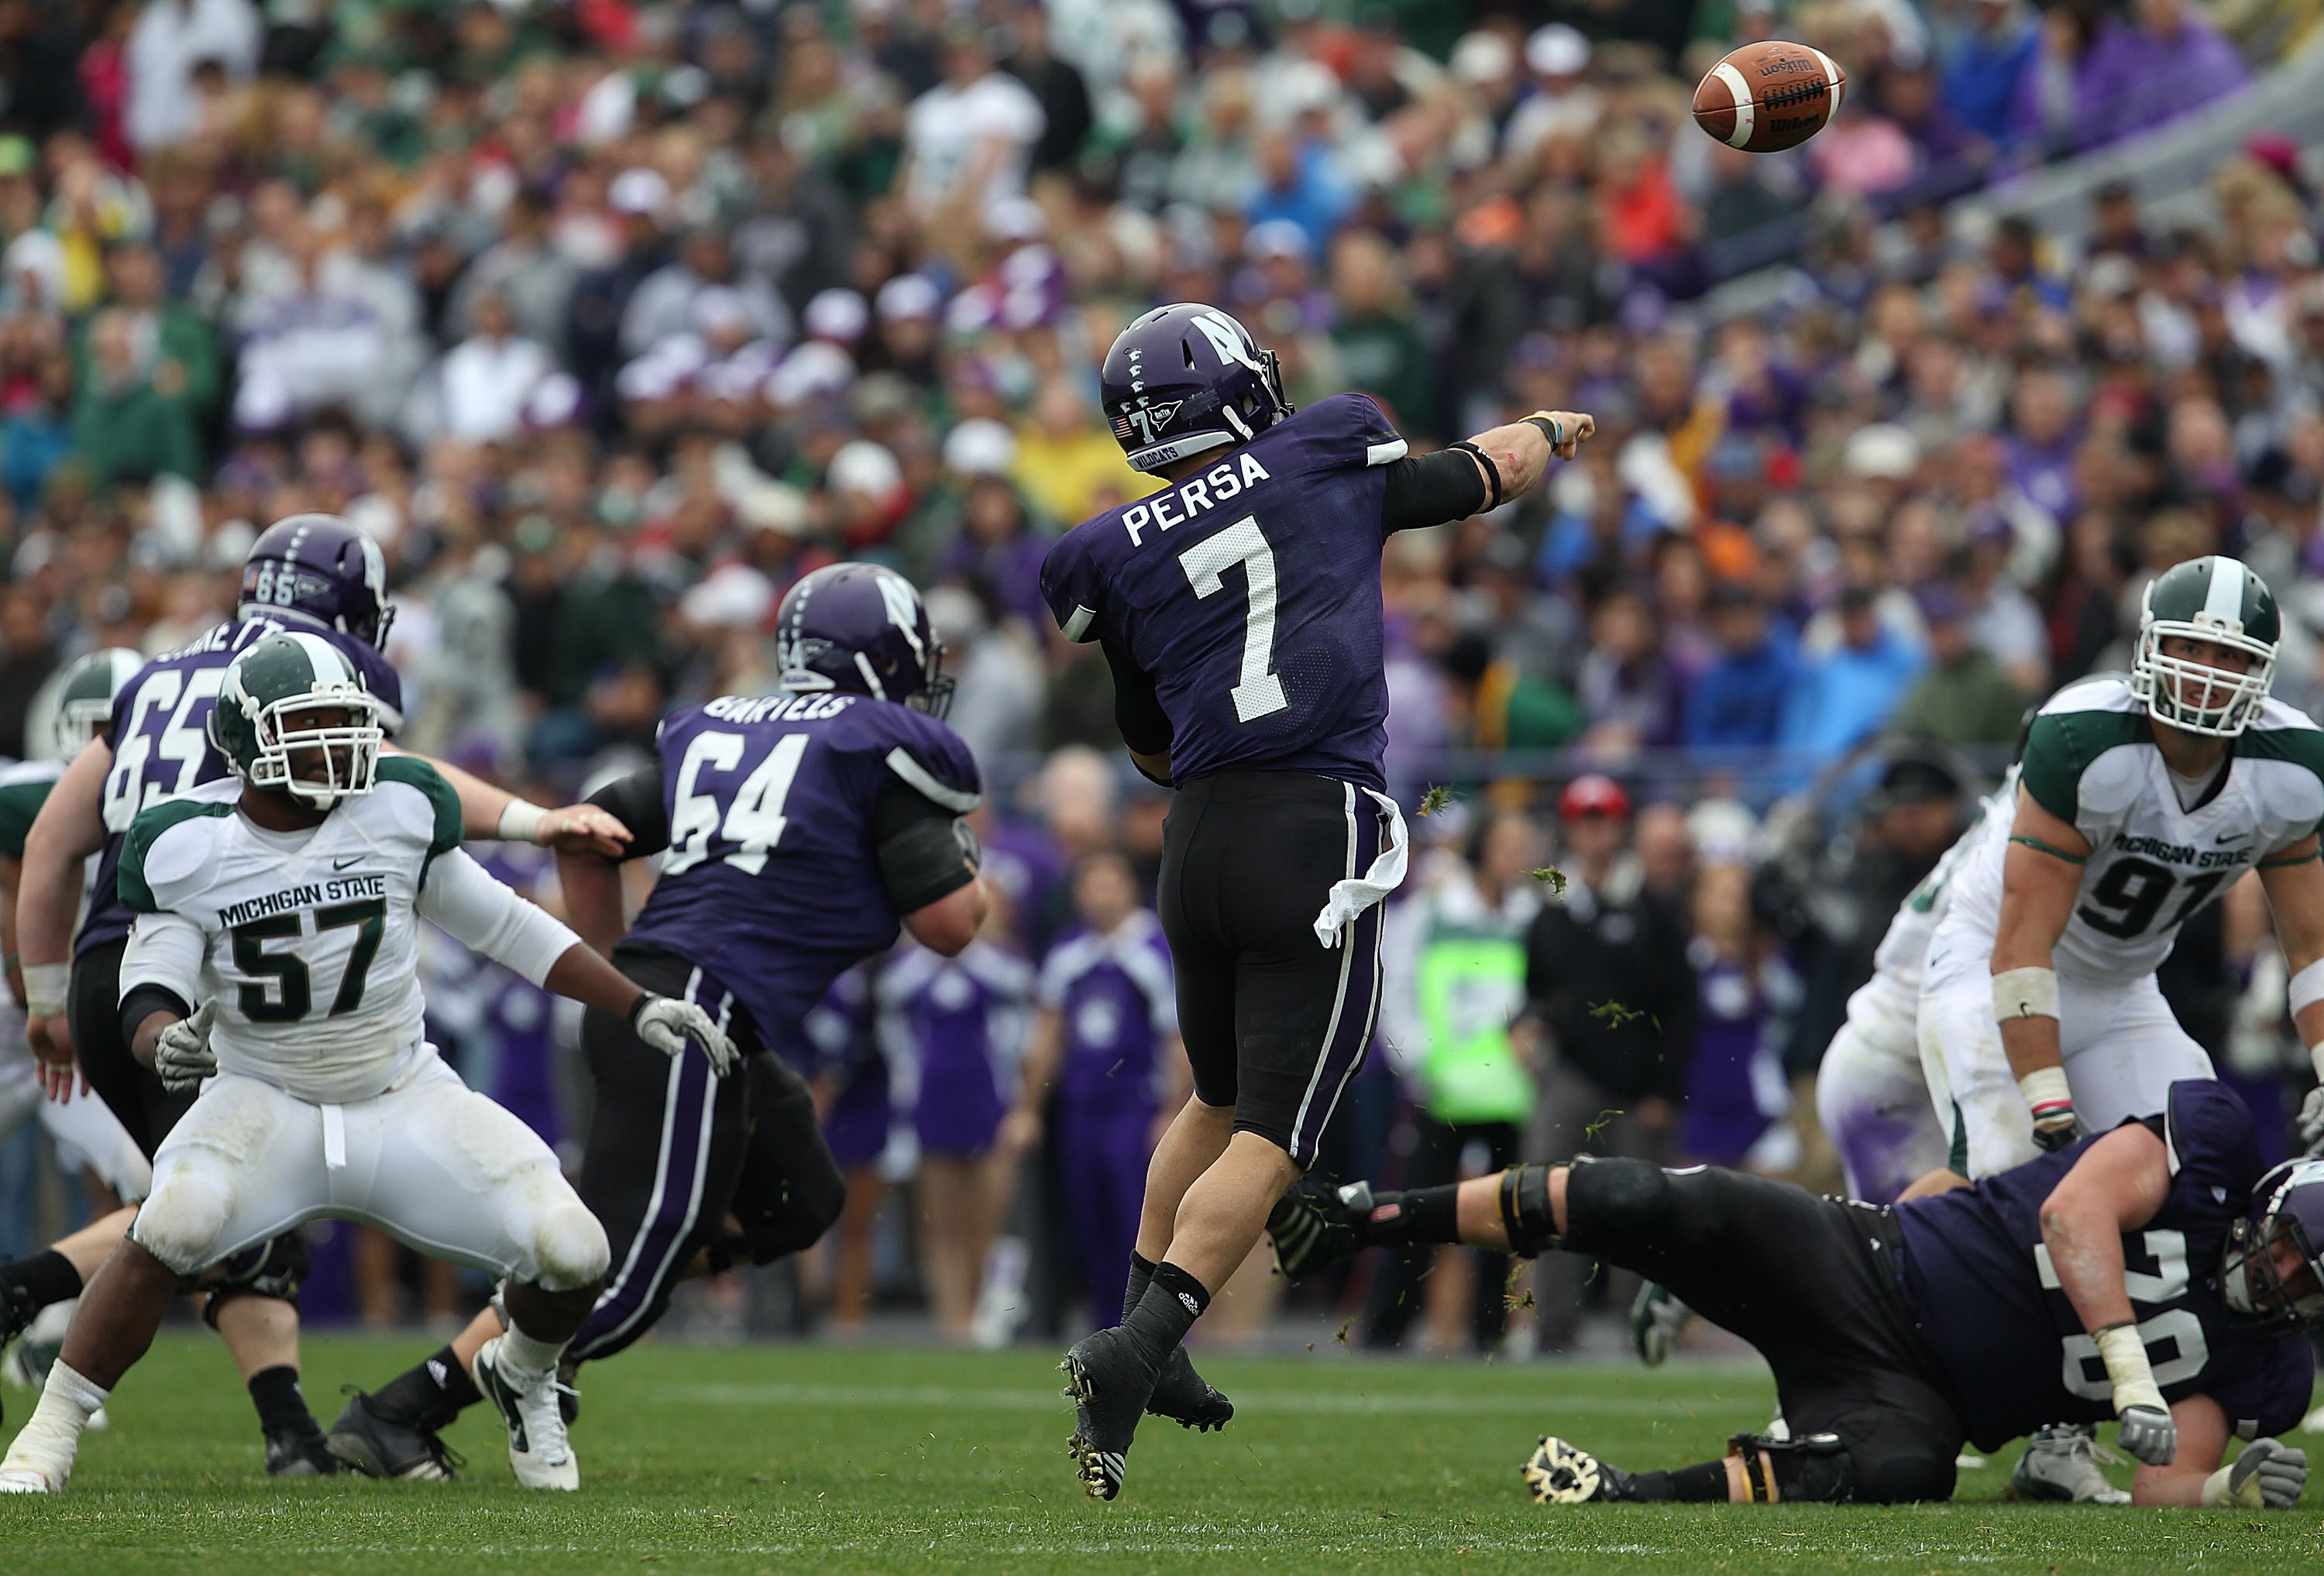 EVANSTON, IL - OCTOBER 23: Dan Persa #7 of the Northwestern Wildcats throws a pass against the Michigan State Spartans at Ryan Field on October 23, 2010 in Evanston, Illinois. Michigan State defeated Northwestern 35-27. (Photo by Jonathan Daniel/Getty Ima